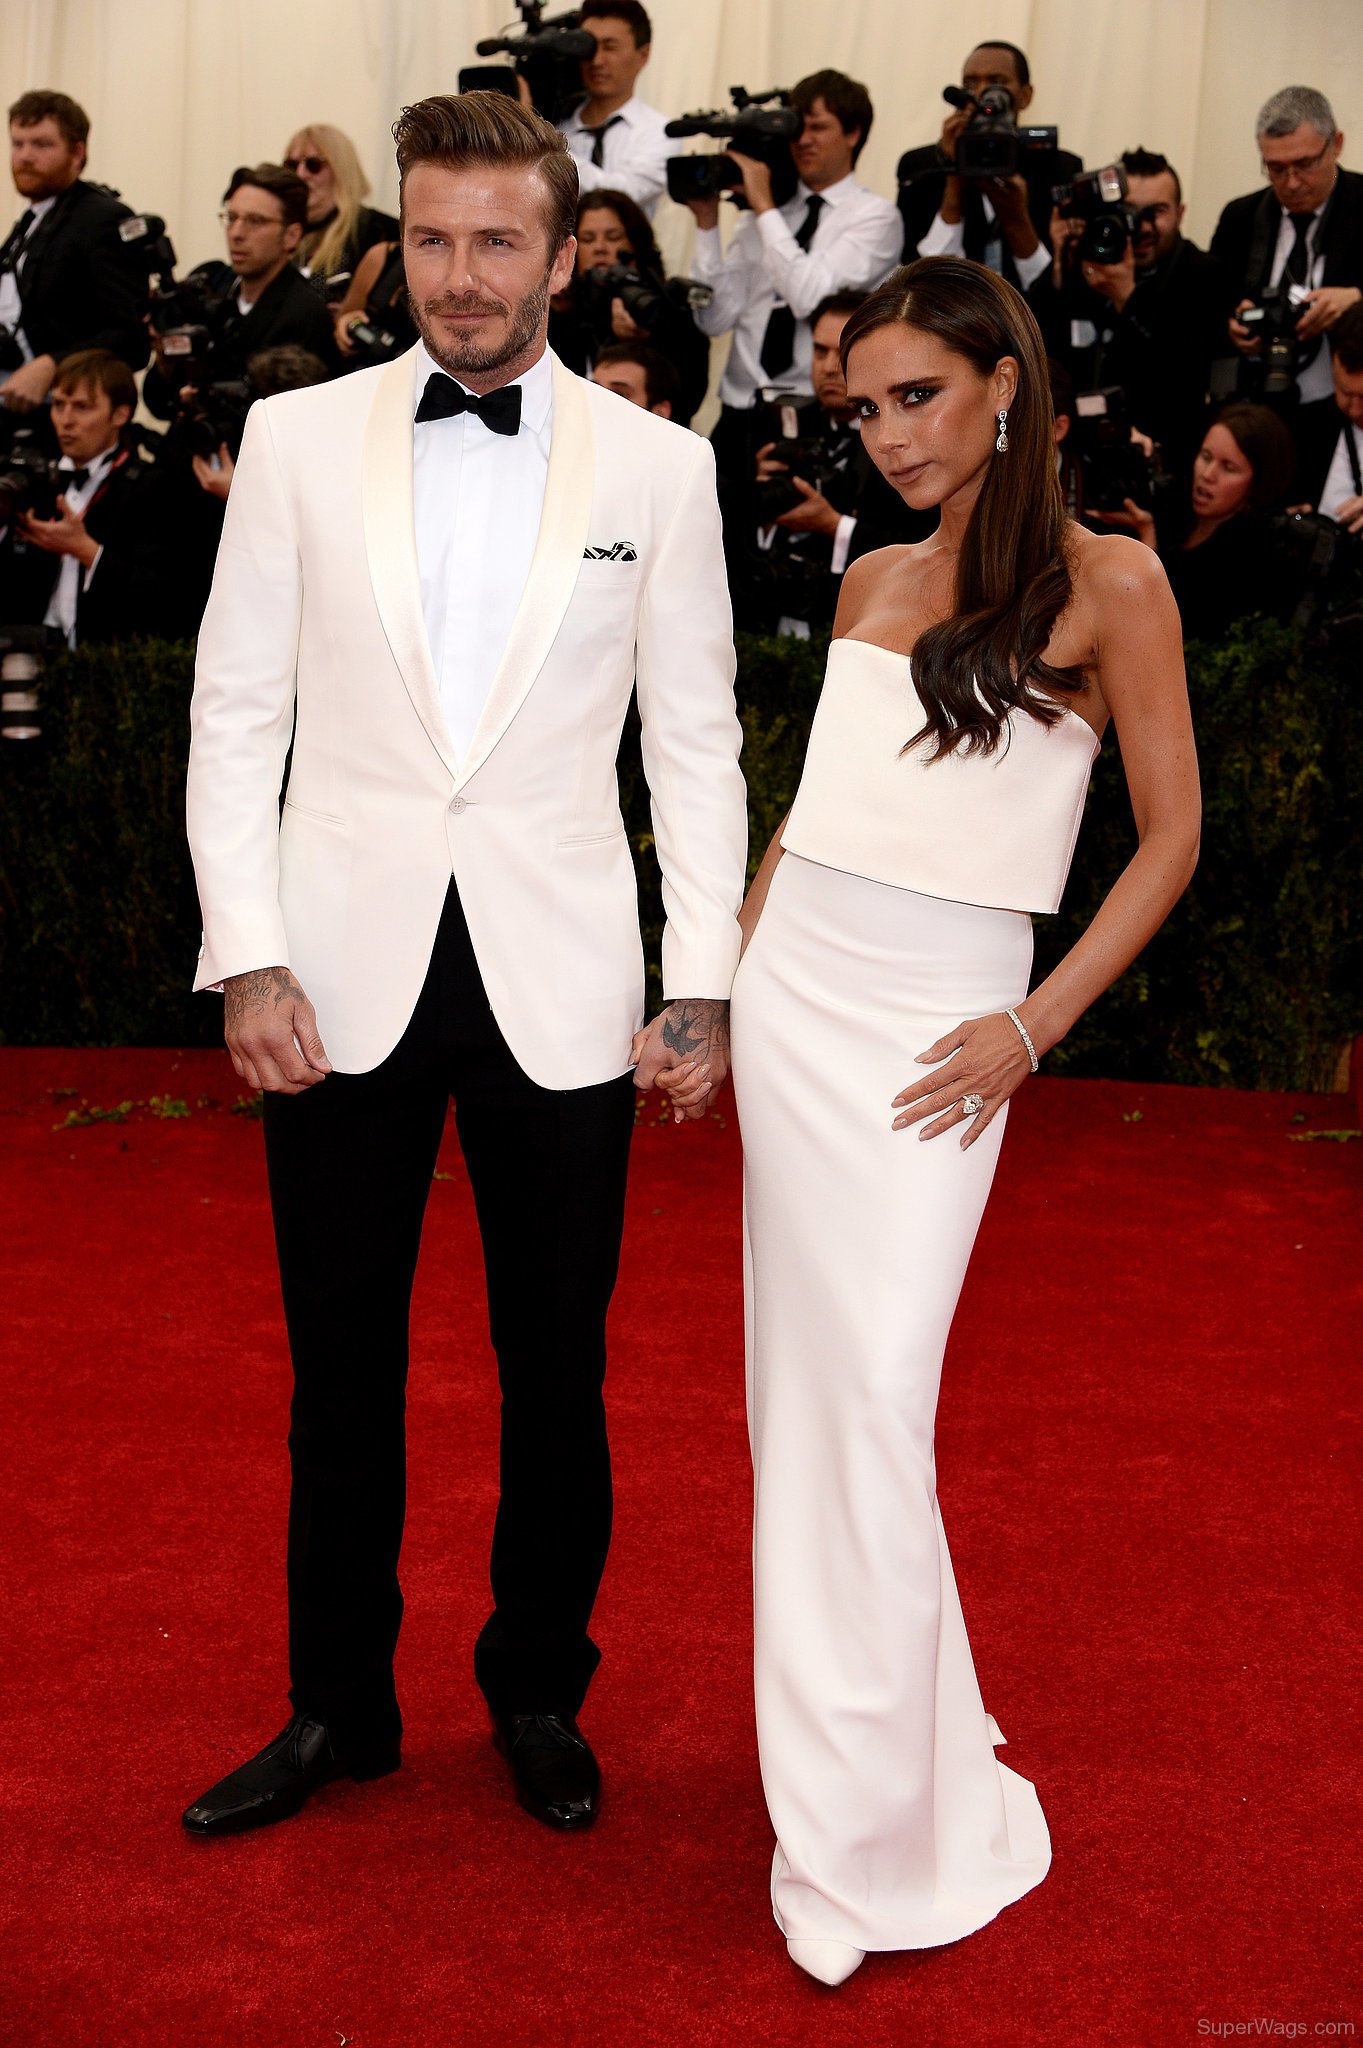 Victoria With David Beckham | Super WAGS - Hottest Wives and ...